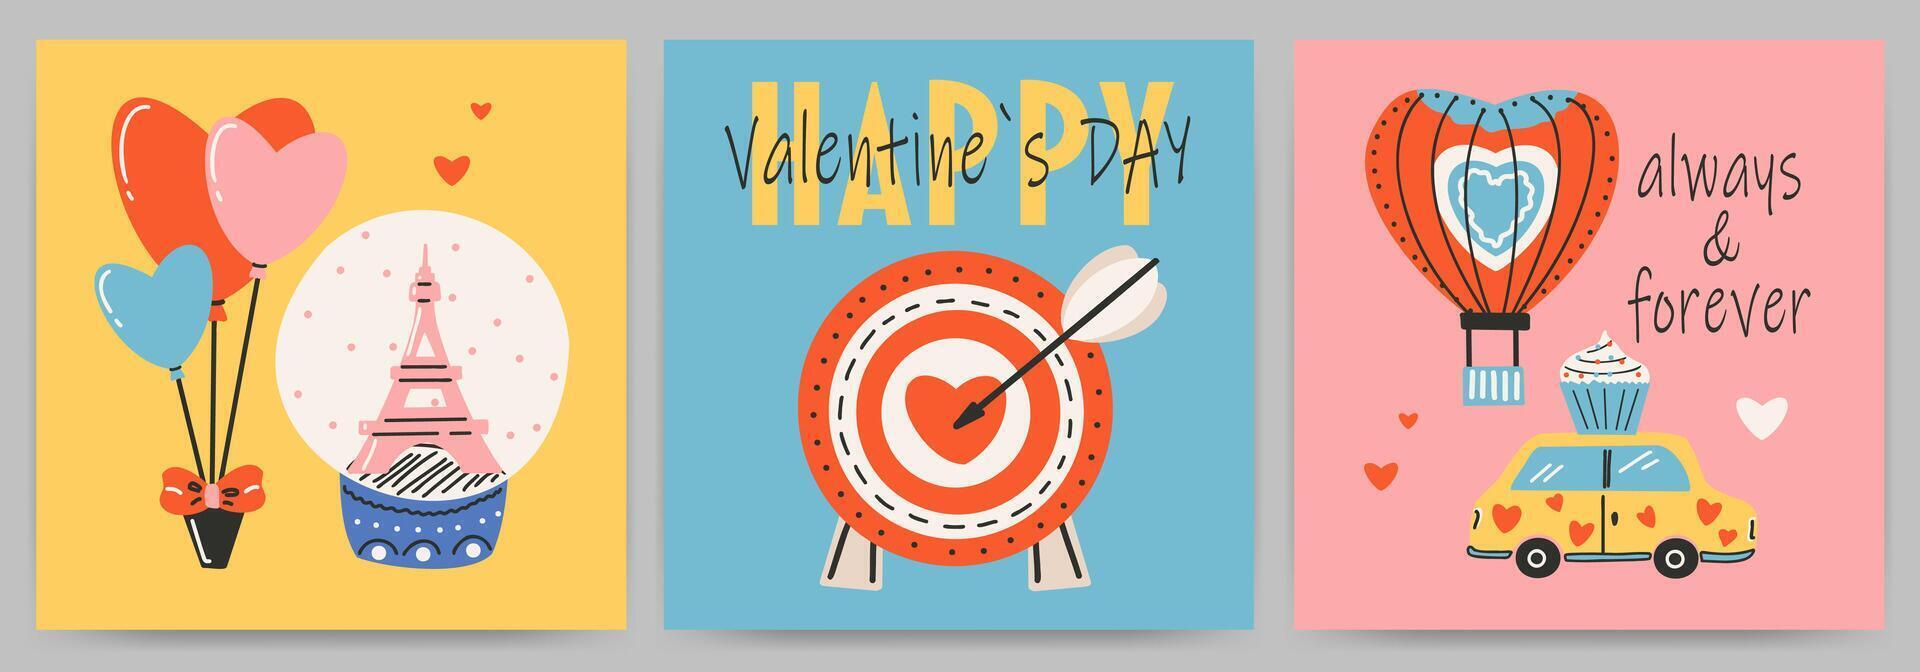 Postcards templates set for Saint Valentine's day, 14 february. Hand drawn cards with target, arrow, car, heart, text. vector